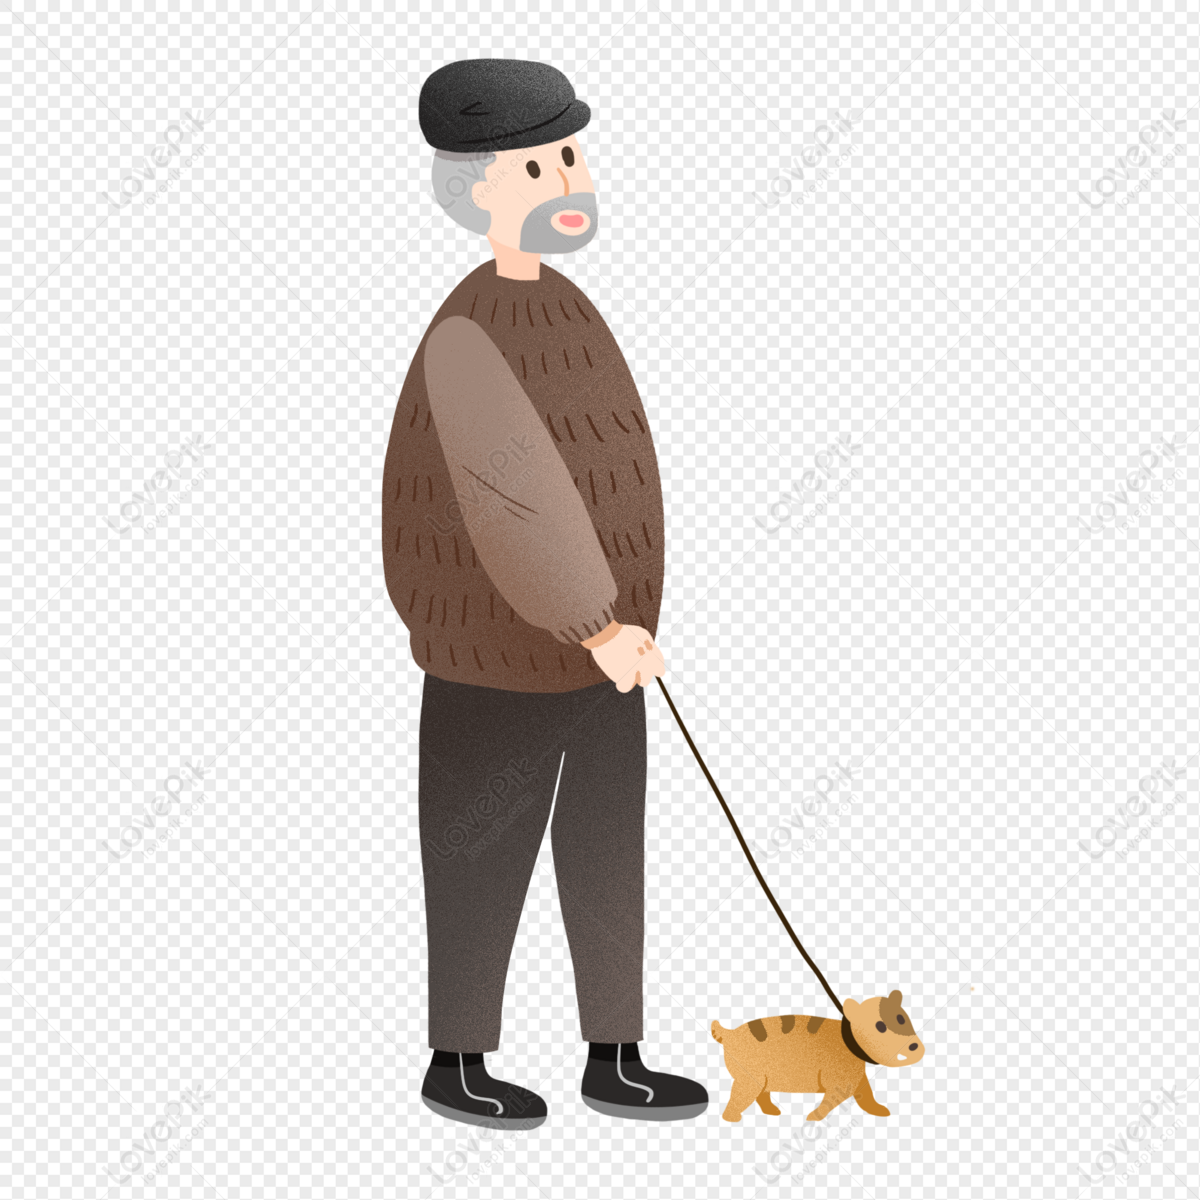 Old Man Walking The Dog In Autumn PNG Hd Transparent Image And Clipart  Image For Free Download - Lovepik | 401524274